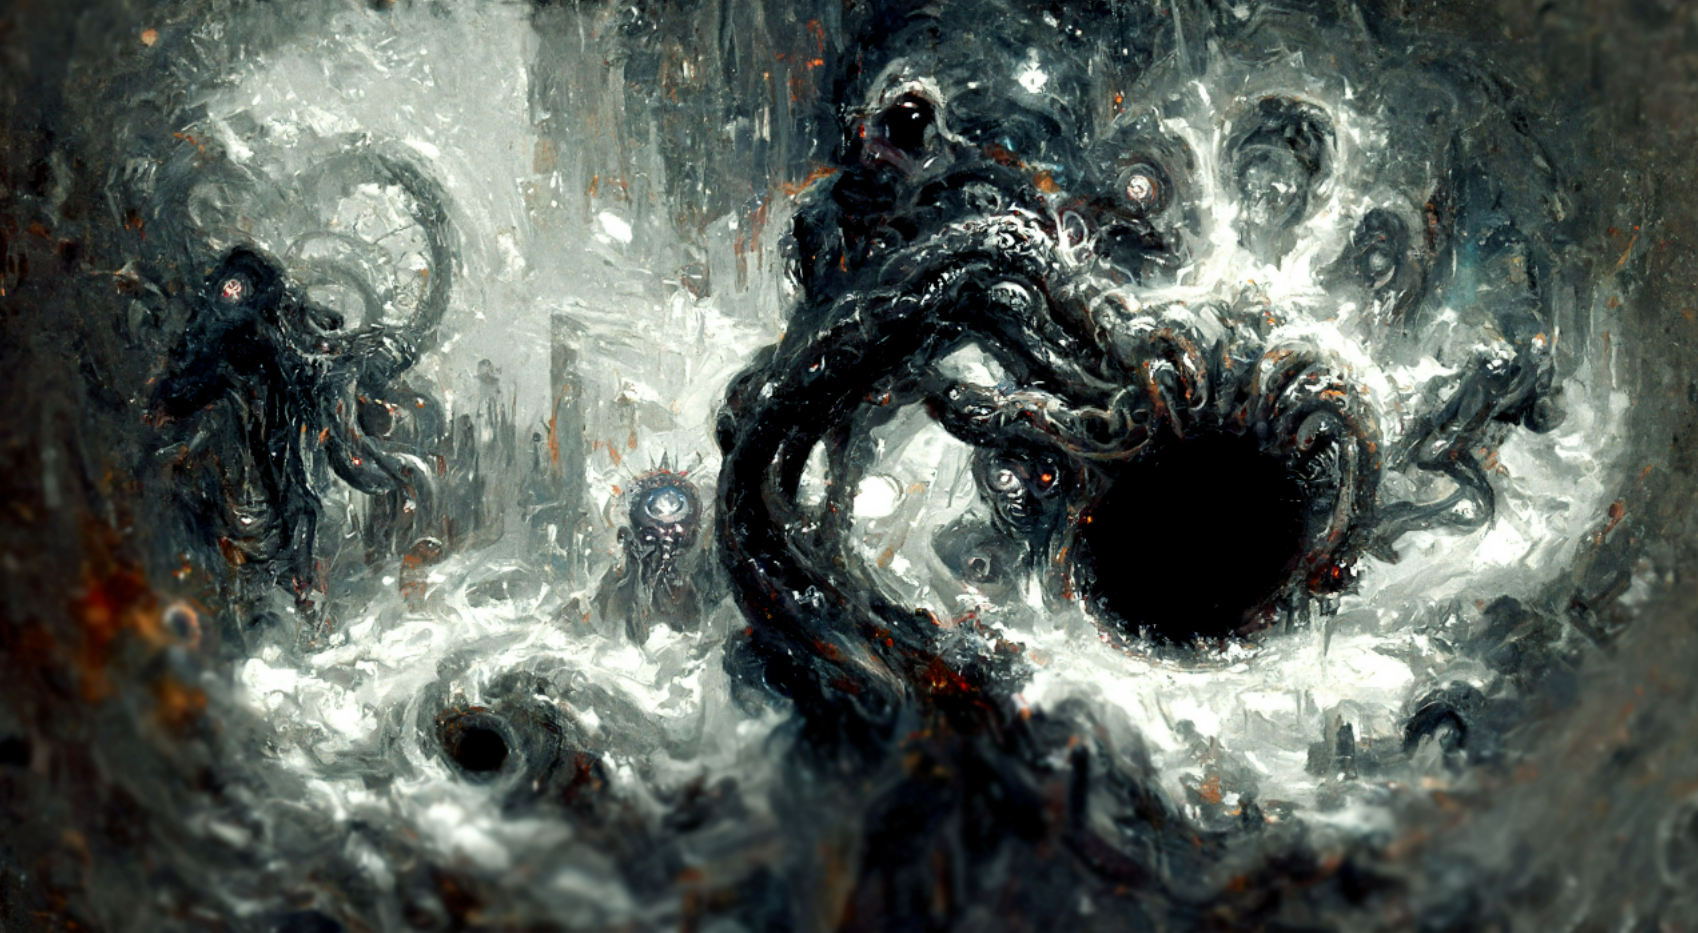 Azathoth, the great old one